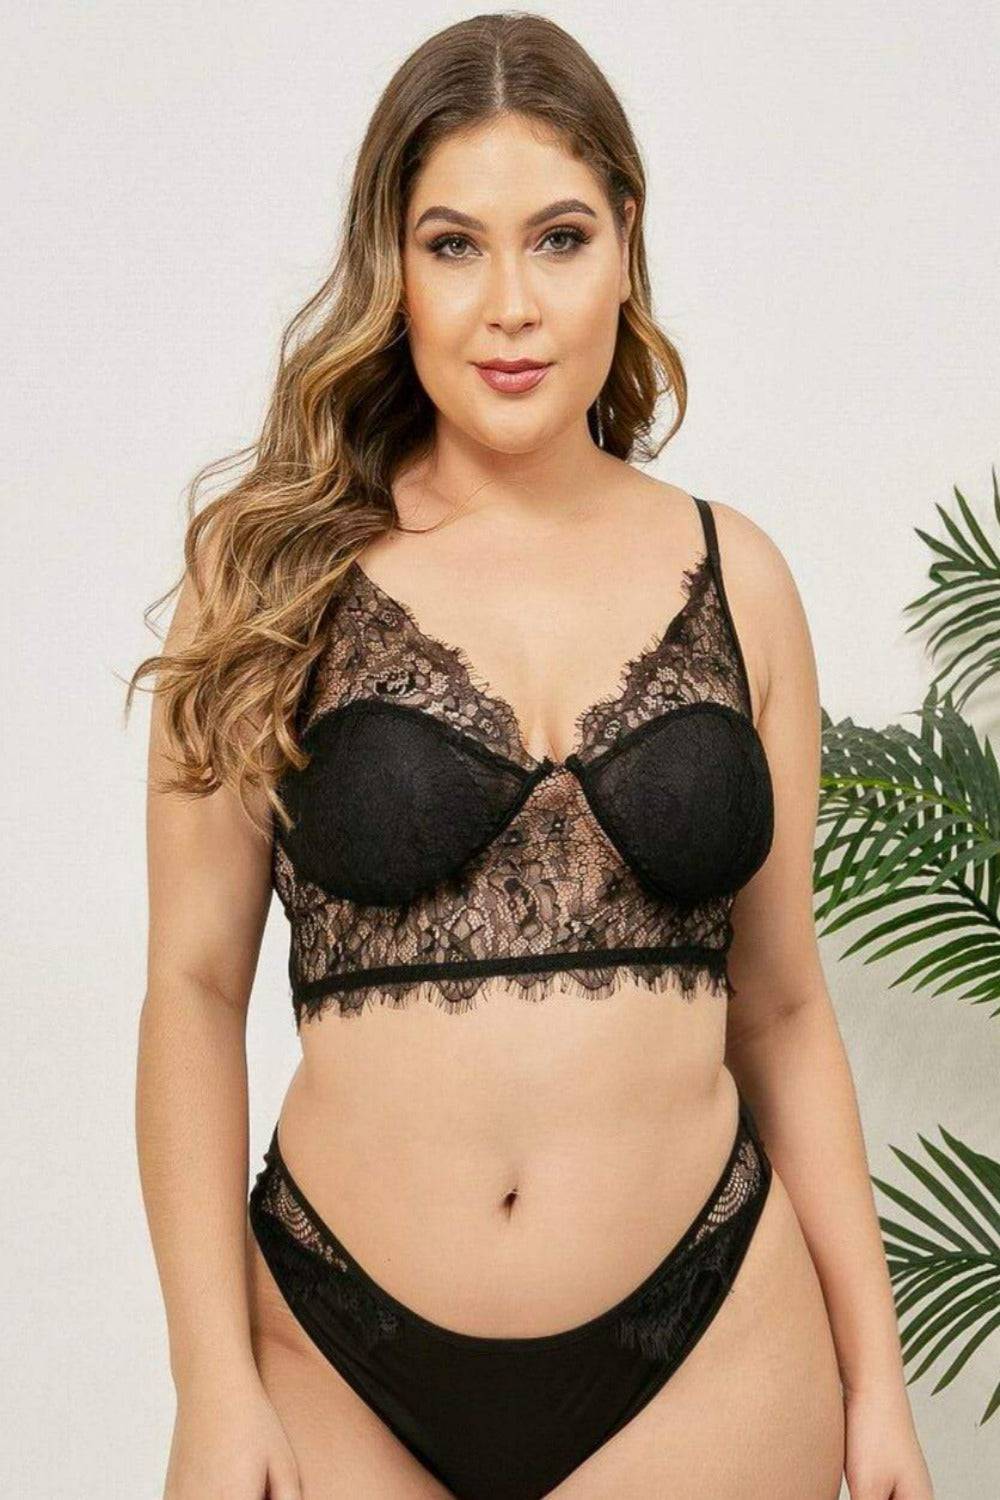 Plus Size Lingerie Set Handmade Bra and Knickers/panties Set in Black Color  With Rose Lace -  Canada